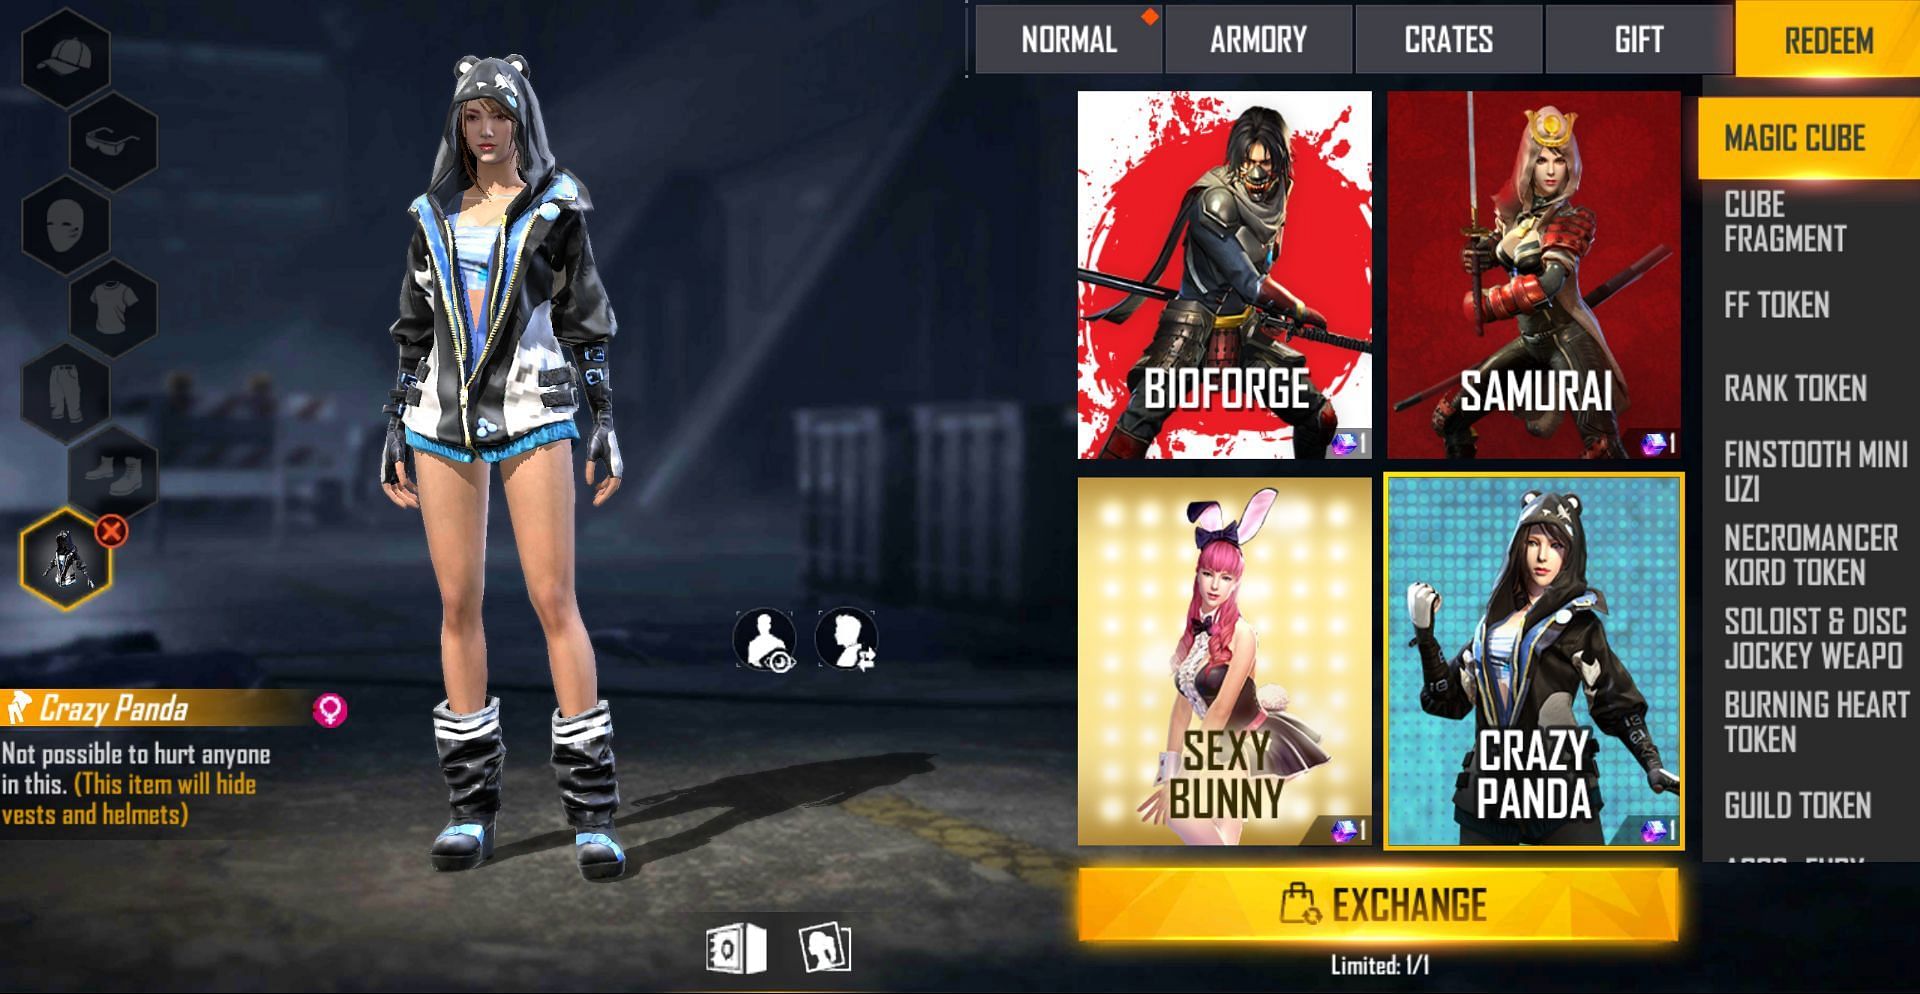 Crazy Panda Bundle is another incredible option for players (Image via Free Fire)